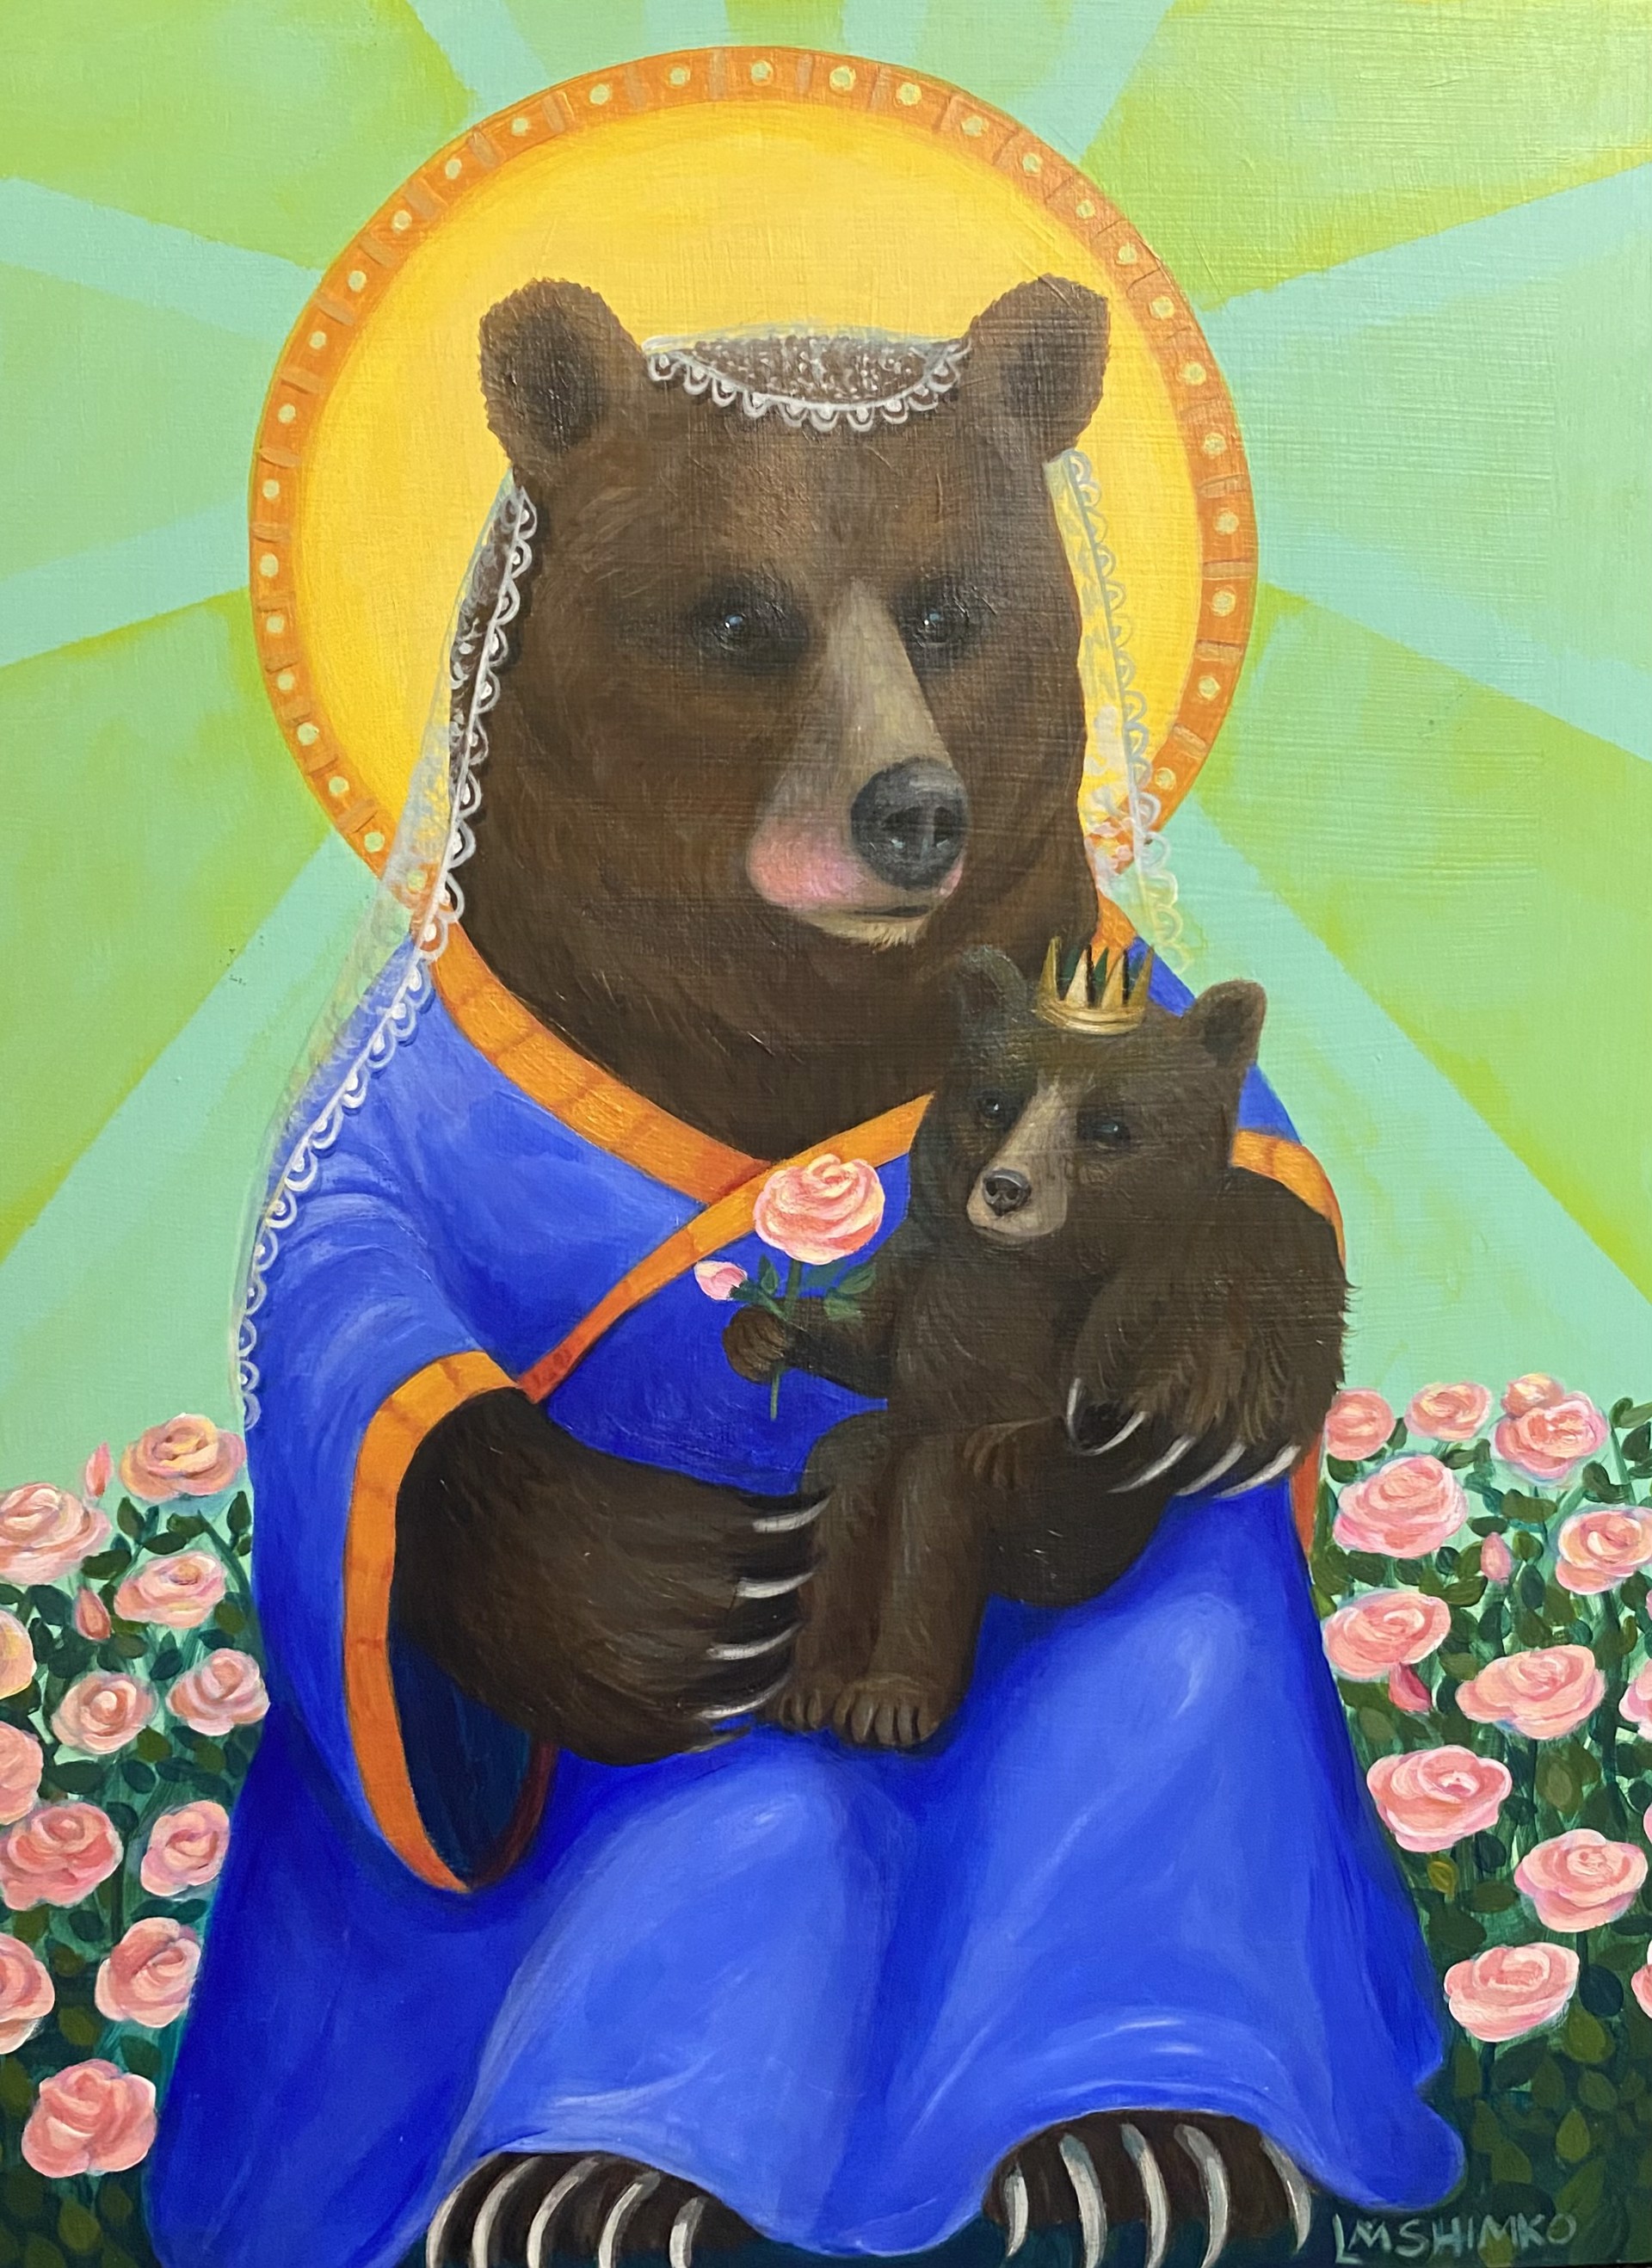 Mother and Child (Roses) by Lisa Shimko